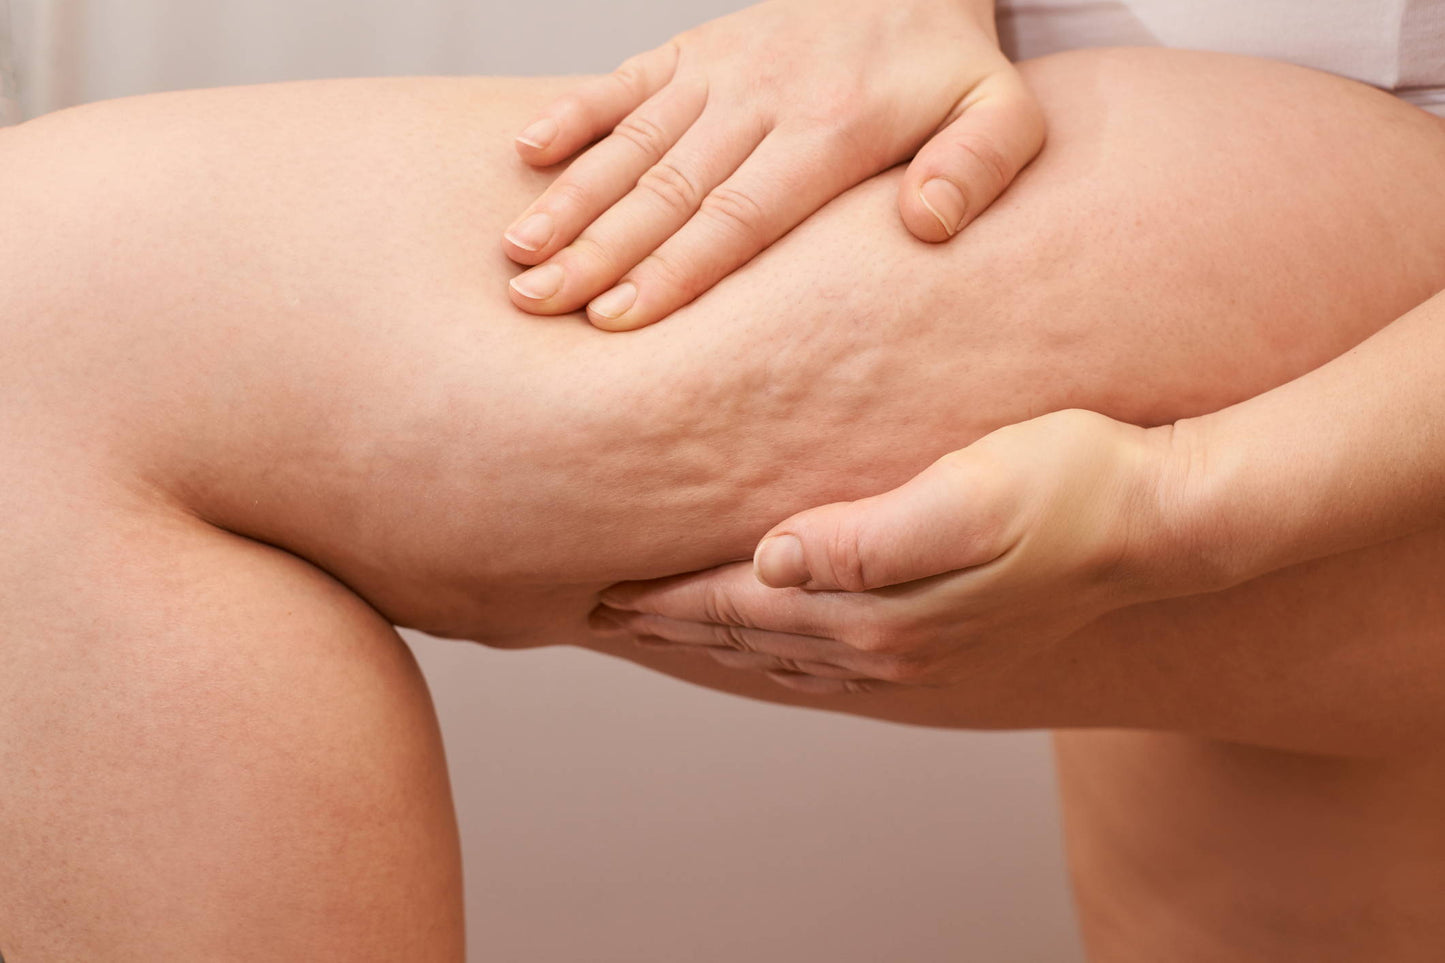 6 Effective Ways To Reduce Cellulite